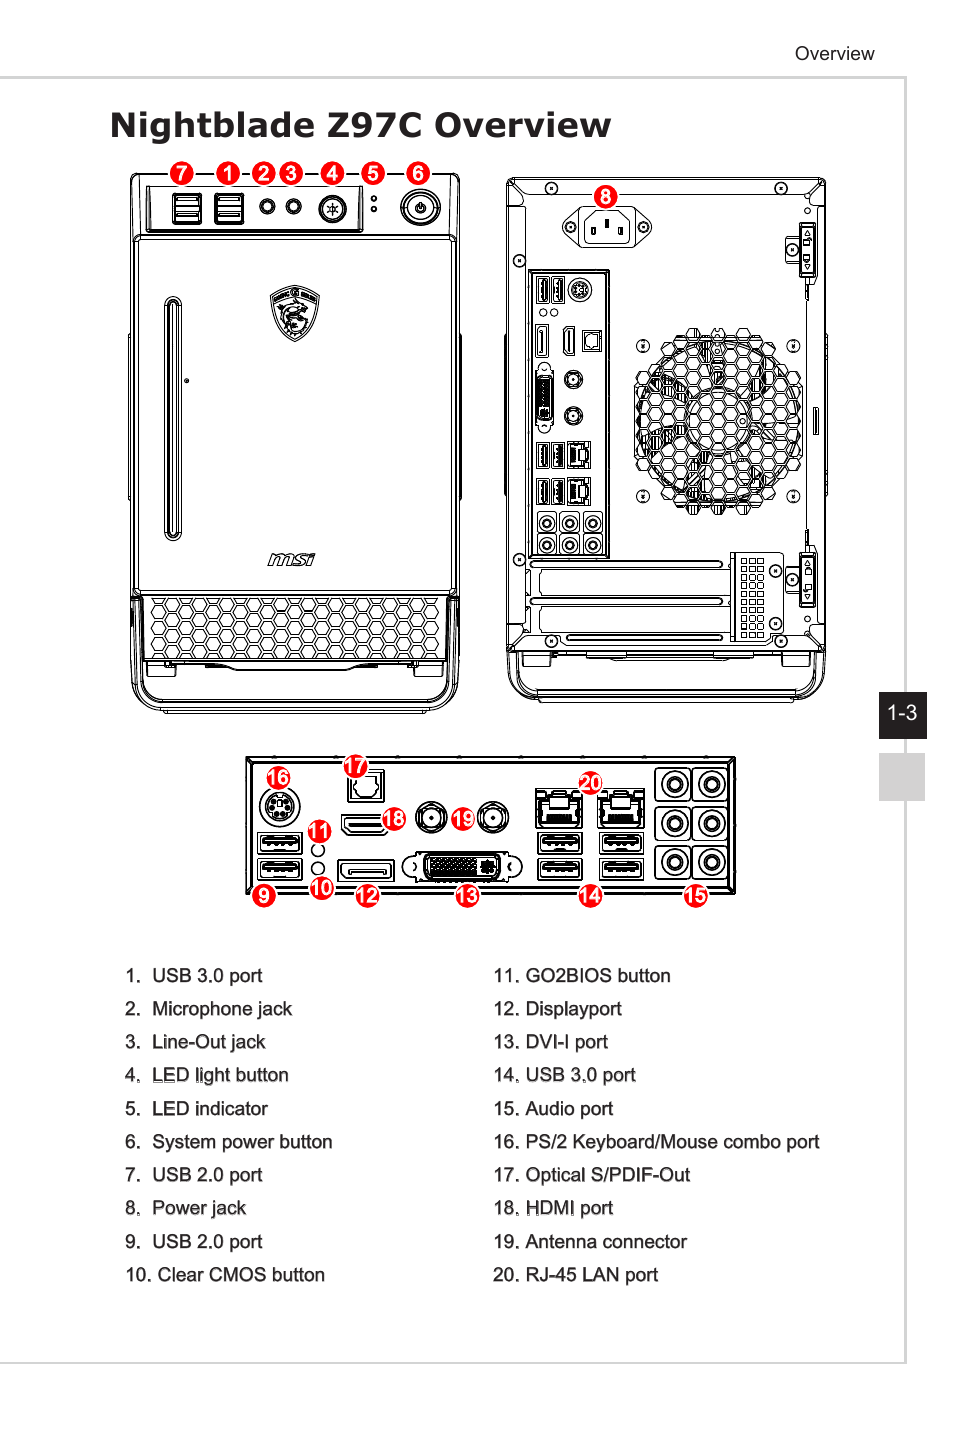 Nightblade z97c overview | MSI NIGHTBLADE Z97 User Manual | Page 11 / 28